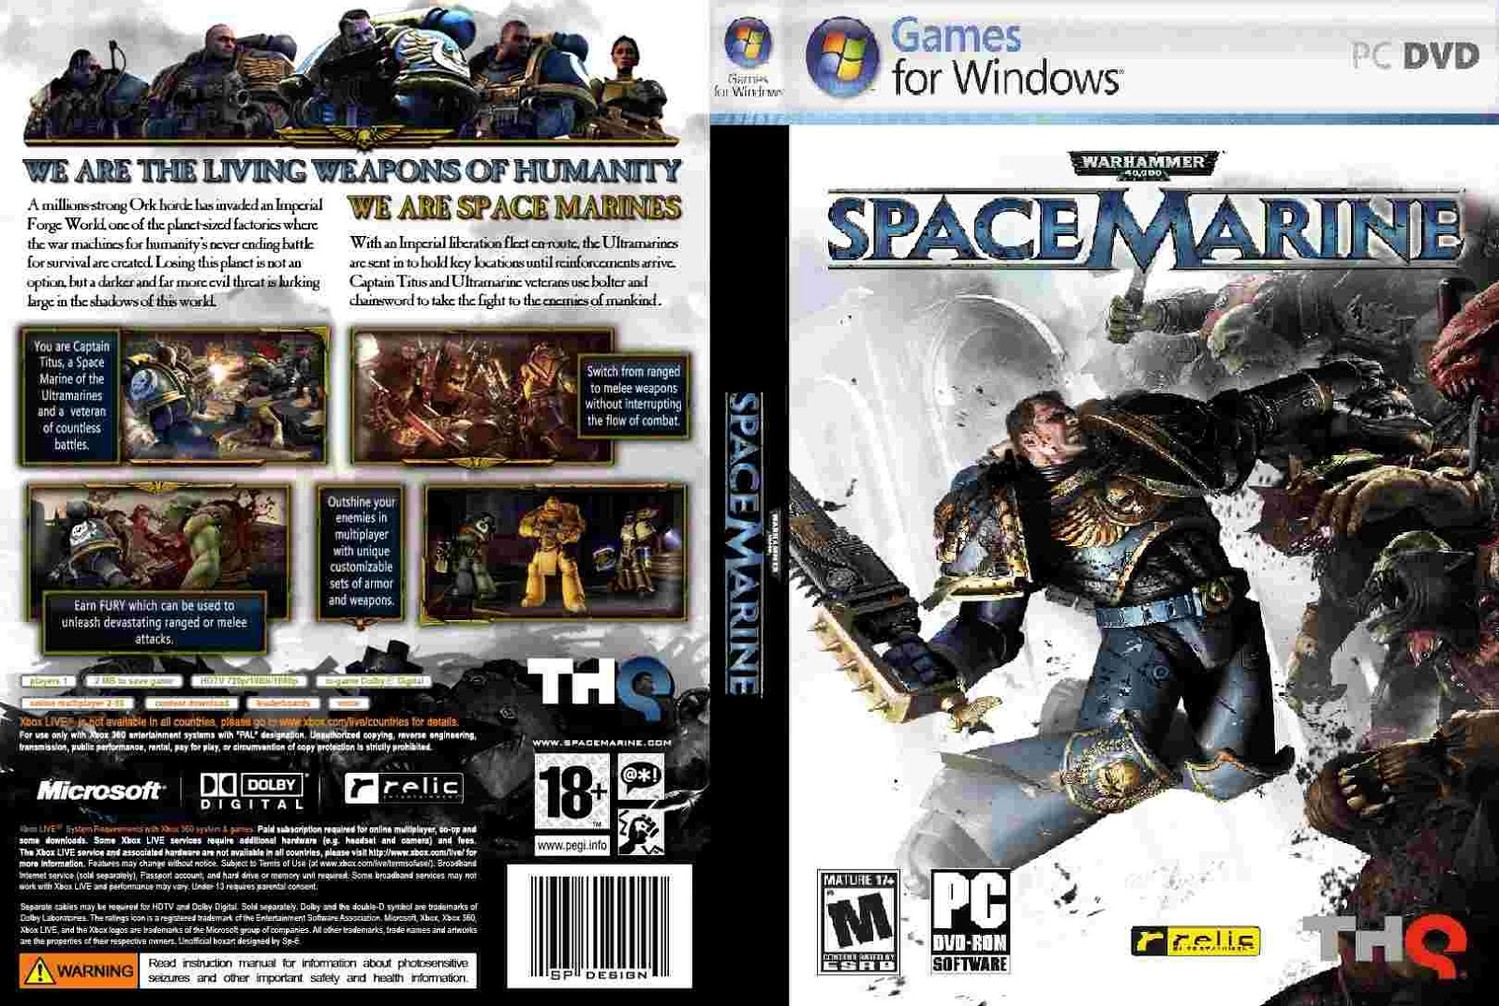 Warhammer 40,000: Space Marine - Collection Edition [v 1.0.165.0 + DLC] (2012) PC | RePack от FitGirl